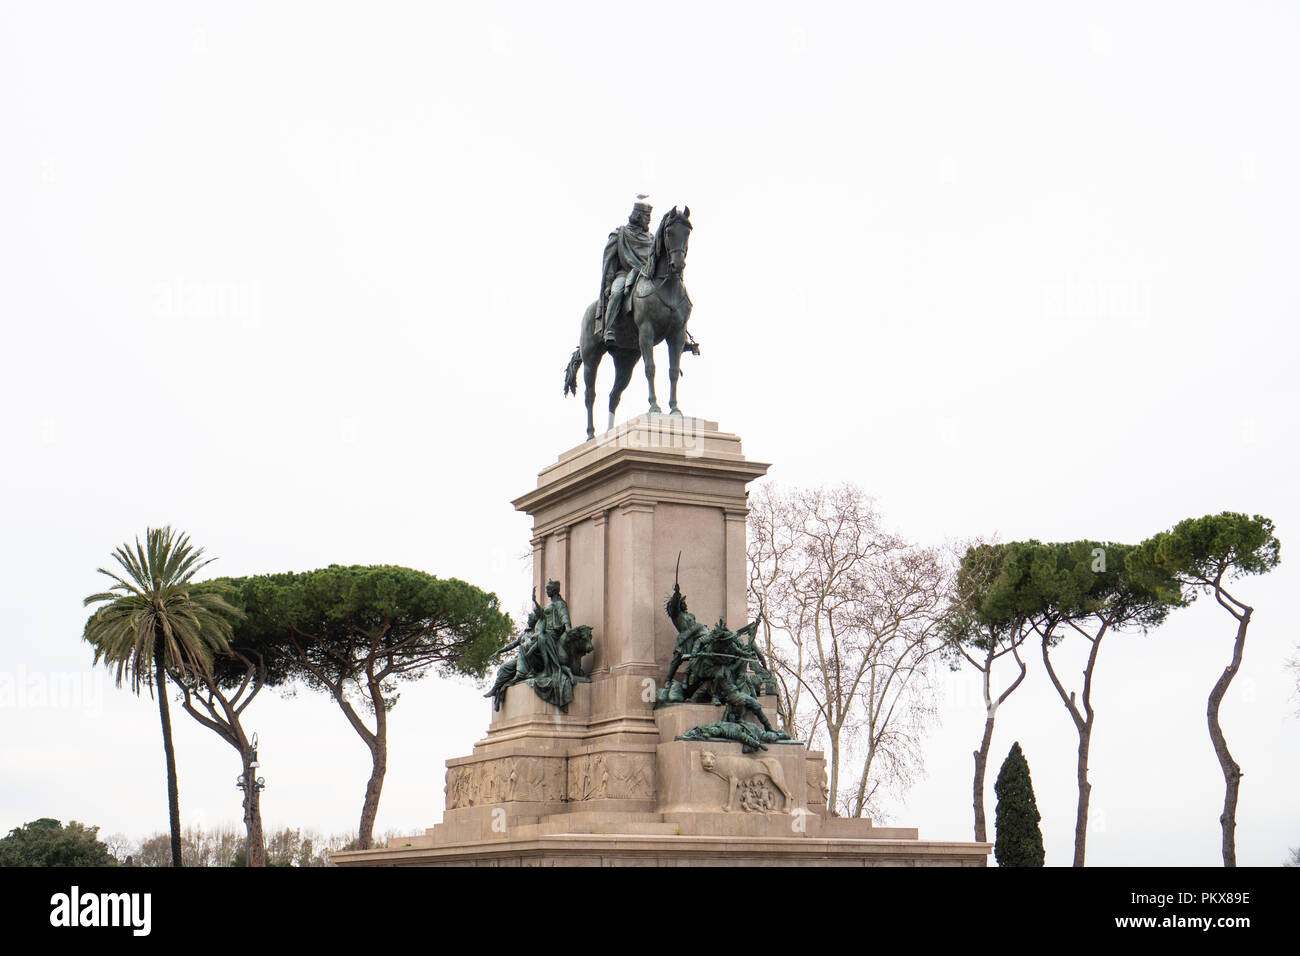 Equestrian statue of Giuseppe Garibaldi is the monument located on the Janiculum hill in Rome Stock Photo